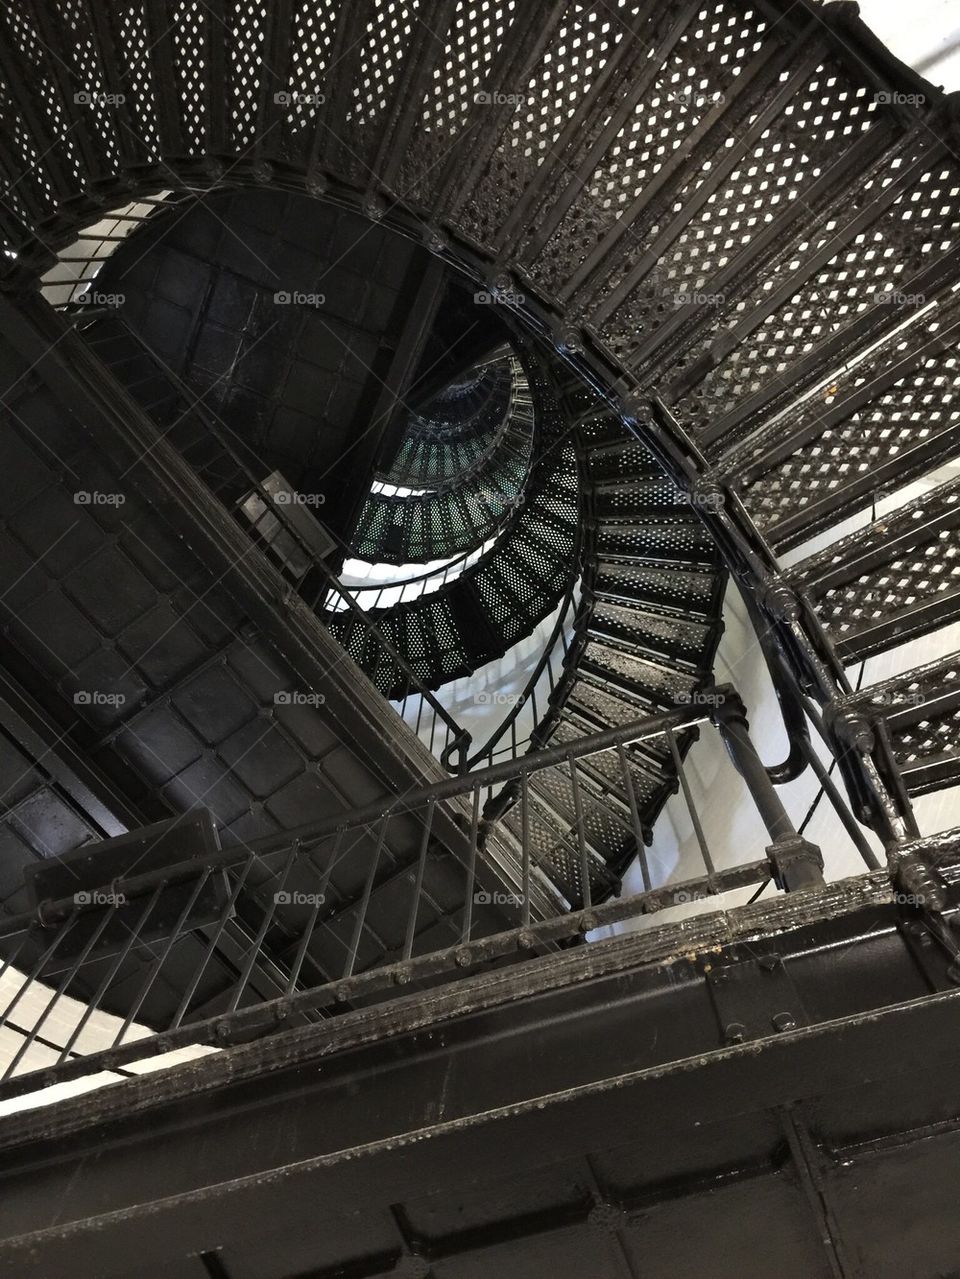 Lighthouse staircase